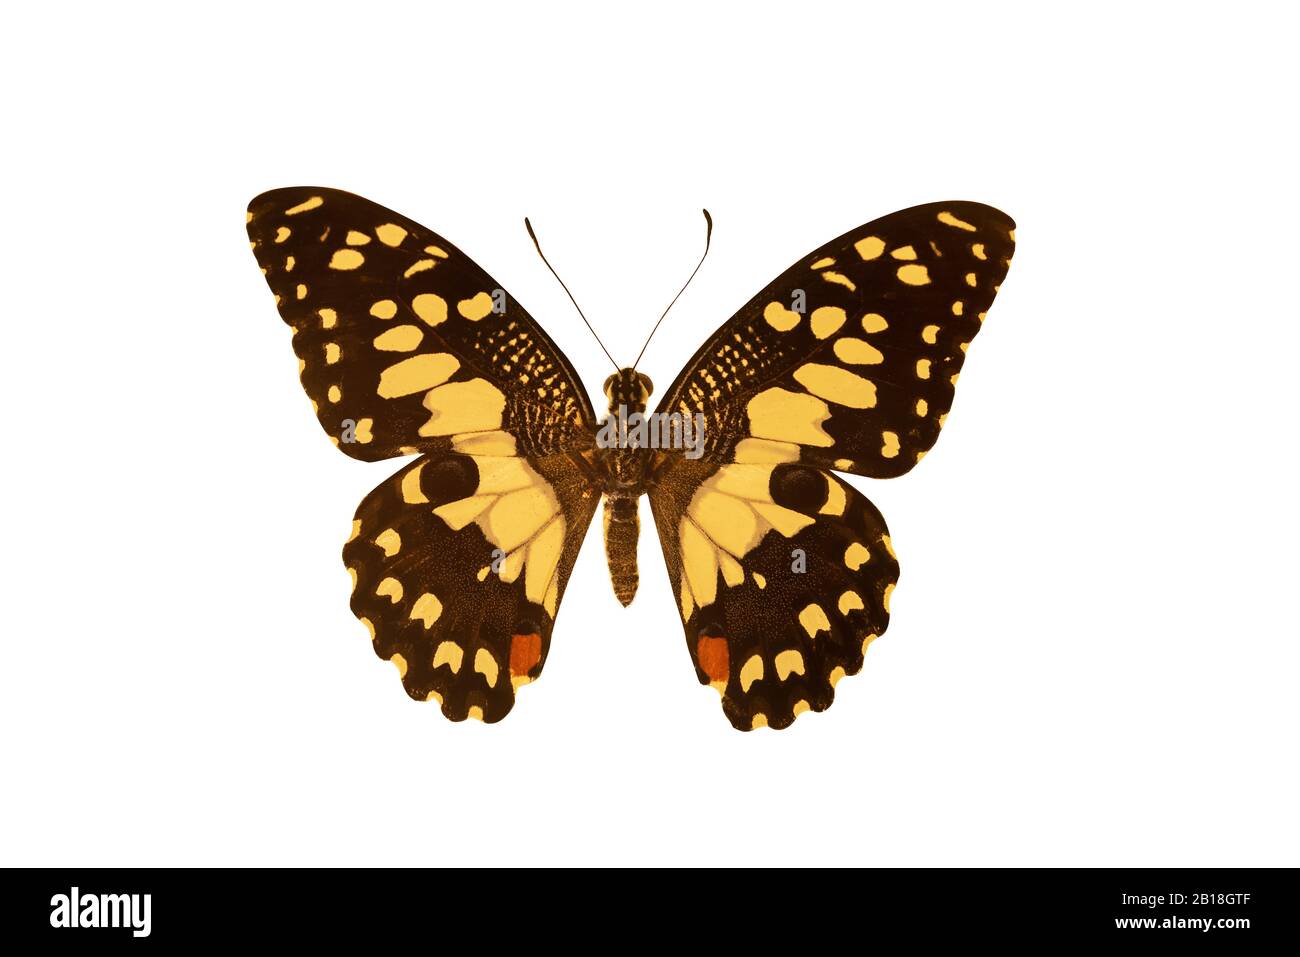 Yellow and black collered Butterfly isolated on white background Stock Photo